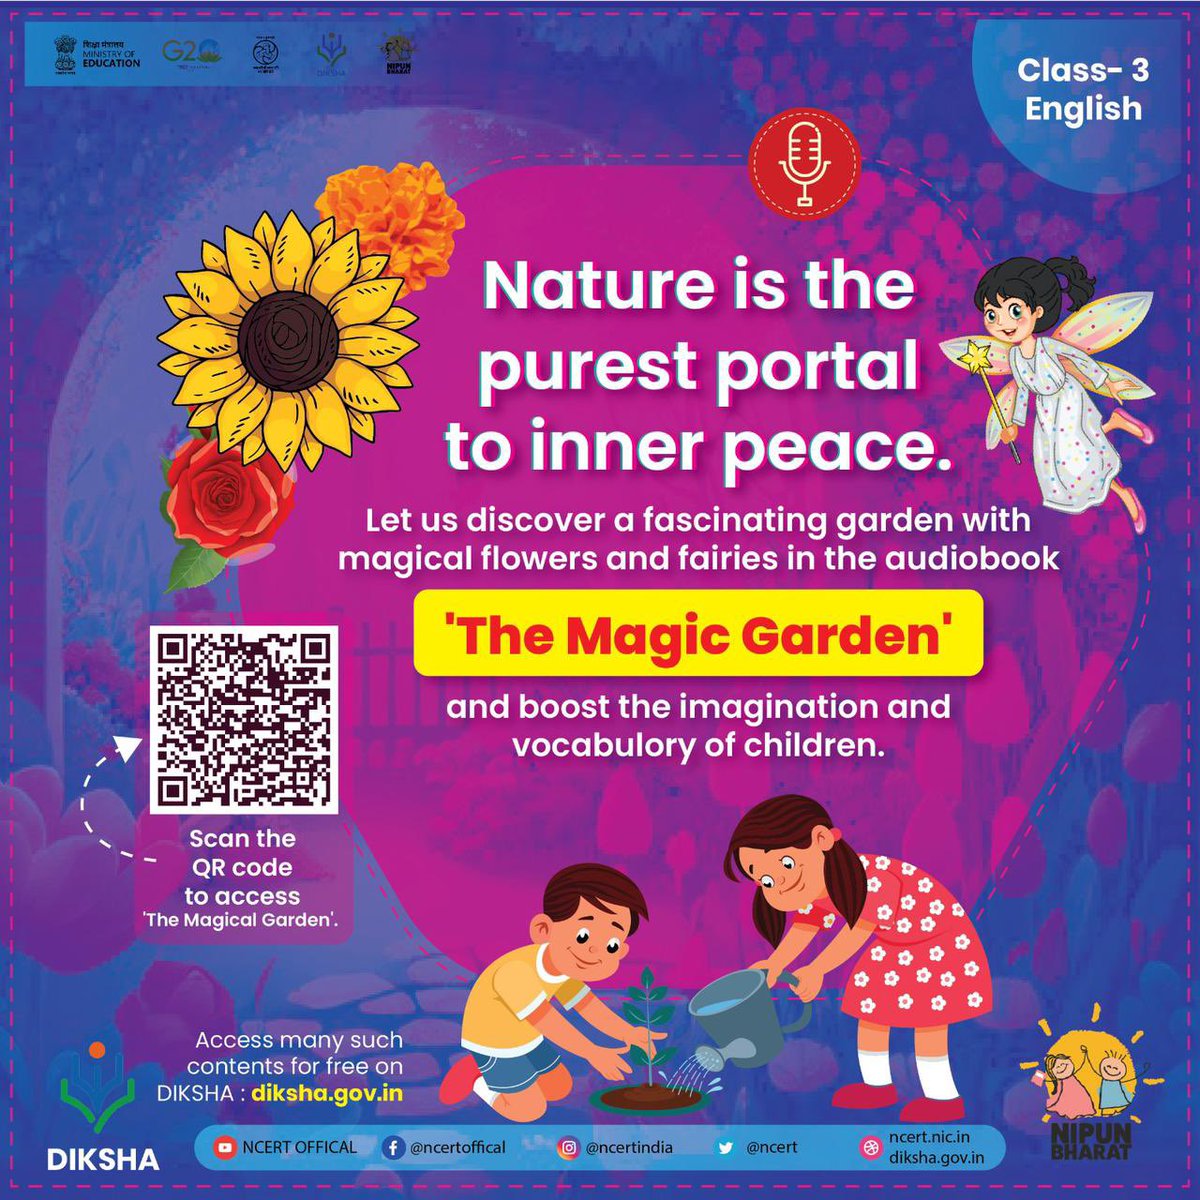 In today's digital world, it is important to interact with nature and learn more about our environment. Let us listen to the audiobook 'The Magical Garden' and learn new words with an illustrous description of a magical world.